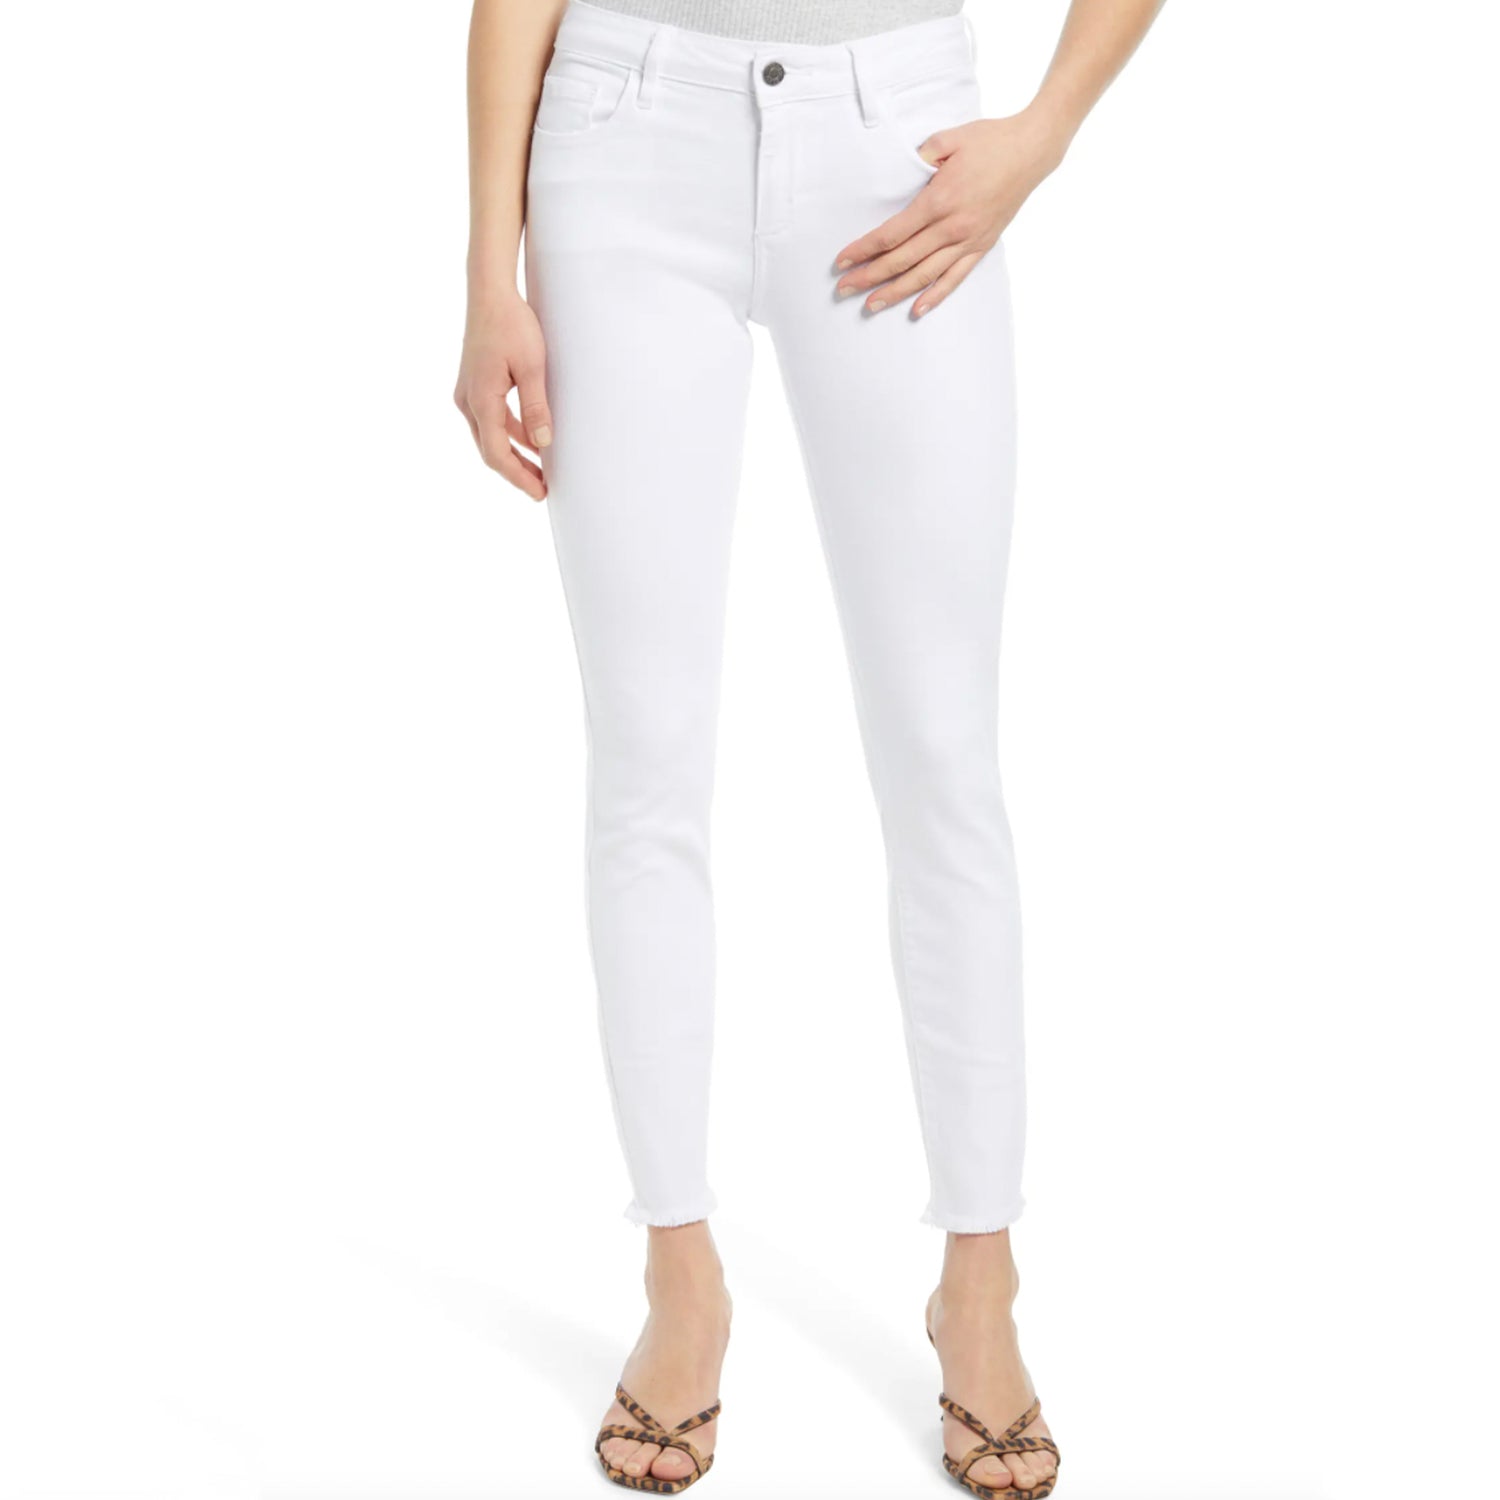 Hidden Amelia Mid Rise Frayed Hem Skinny Jeans. Welcome white-jeans season in this stretch-kissed pair of jeans finished with a trendy frayed hem